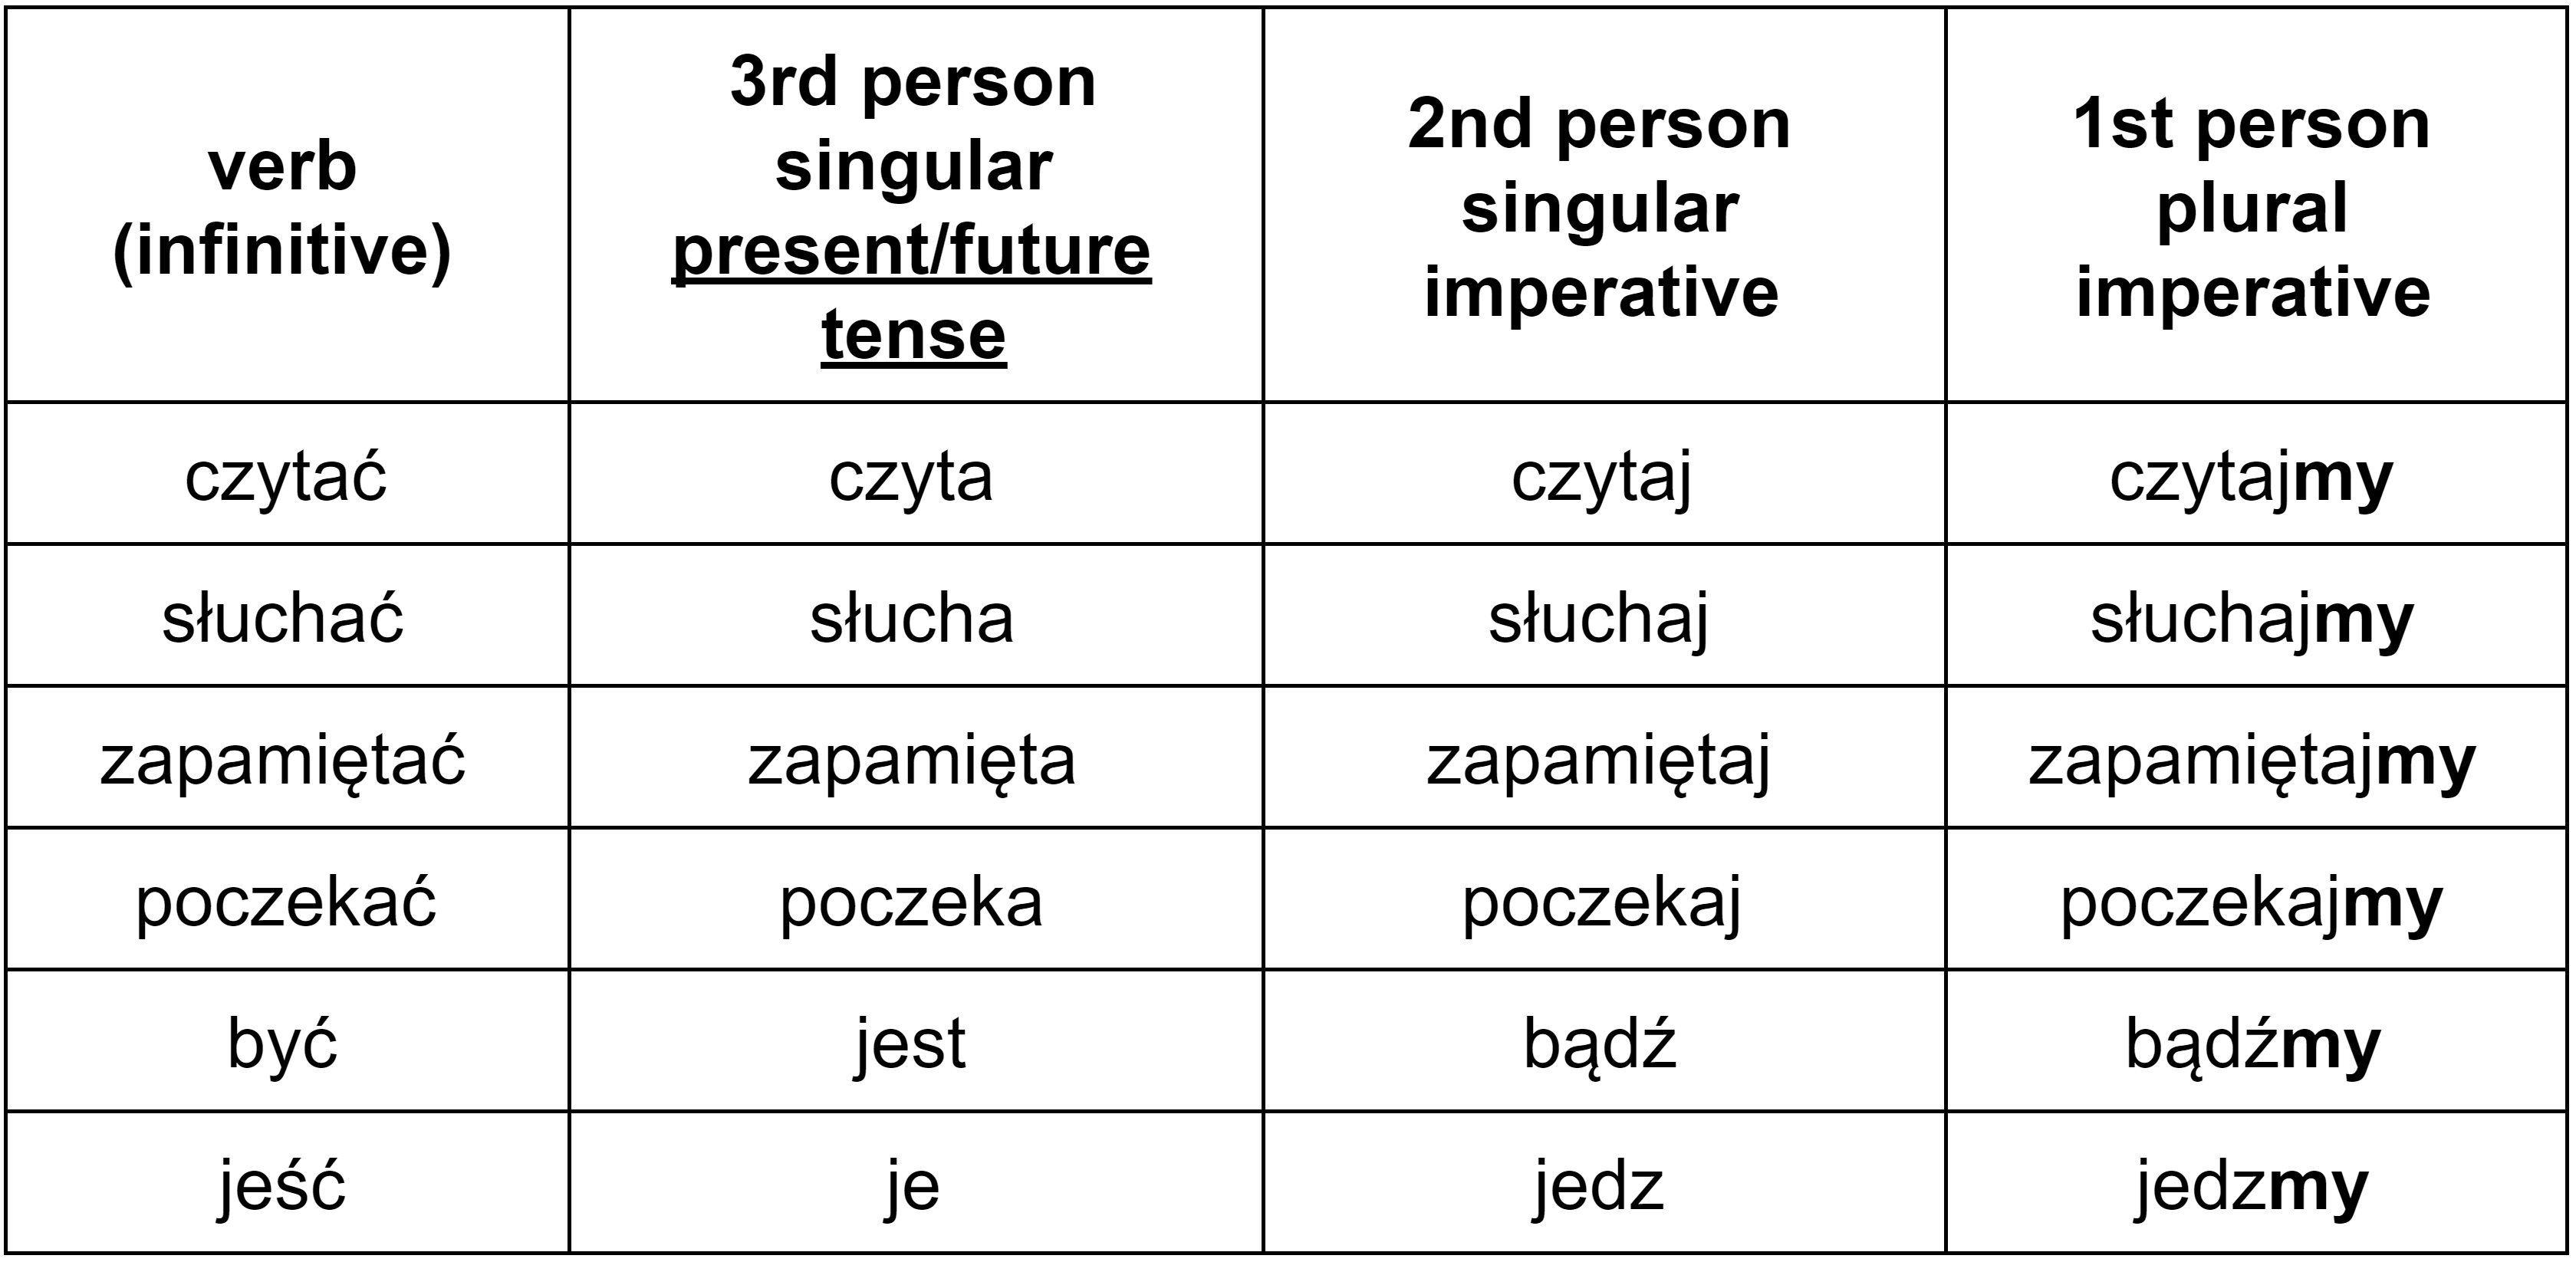 Polish imperative verbs in the first person plural table